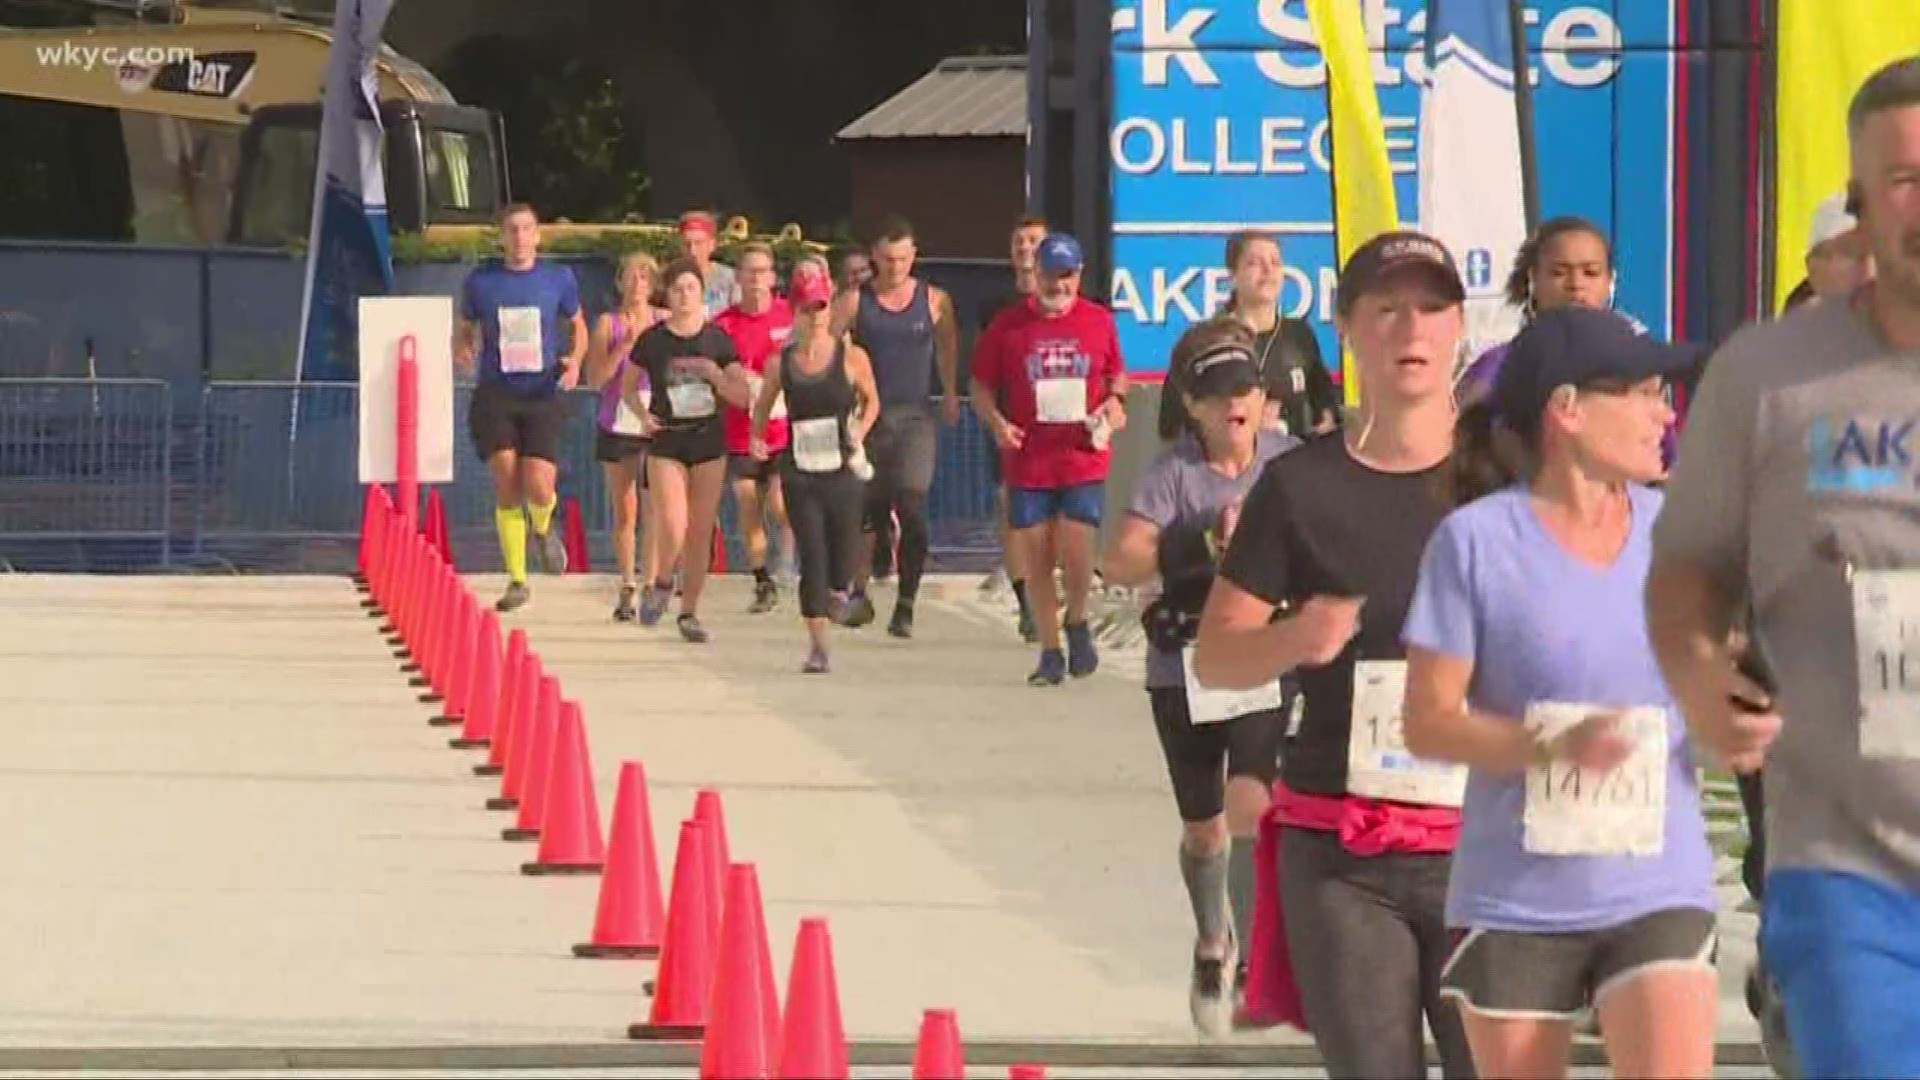 Experts recommend runners slow their pace and stay hydrated. Dorsena Drakeford reports.